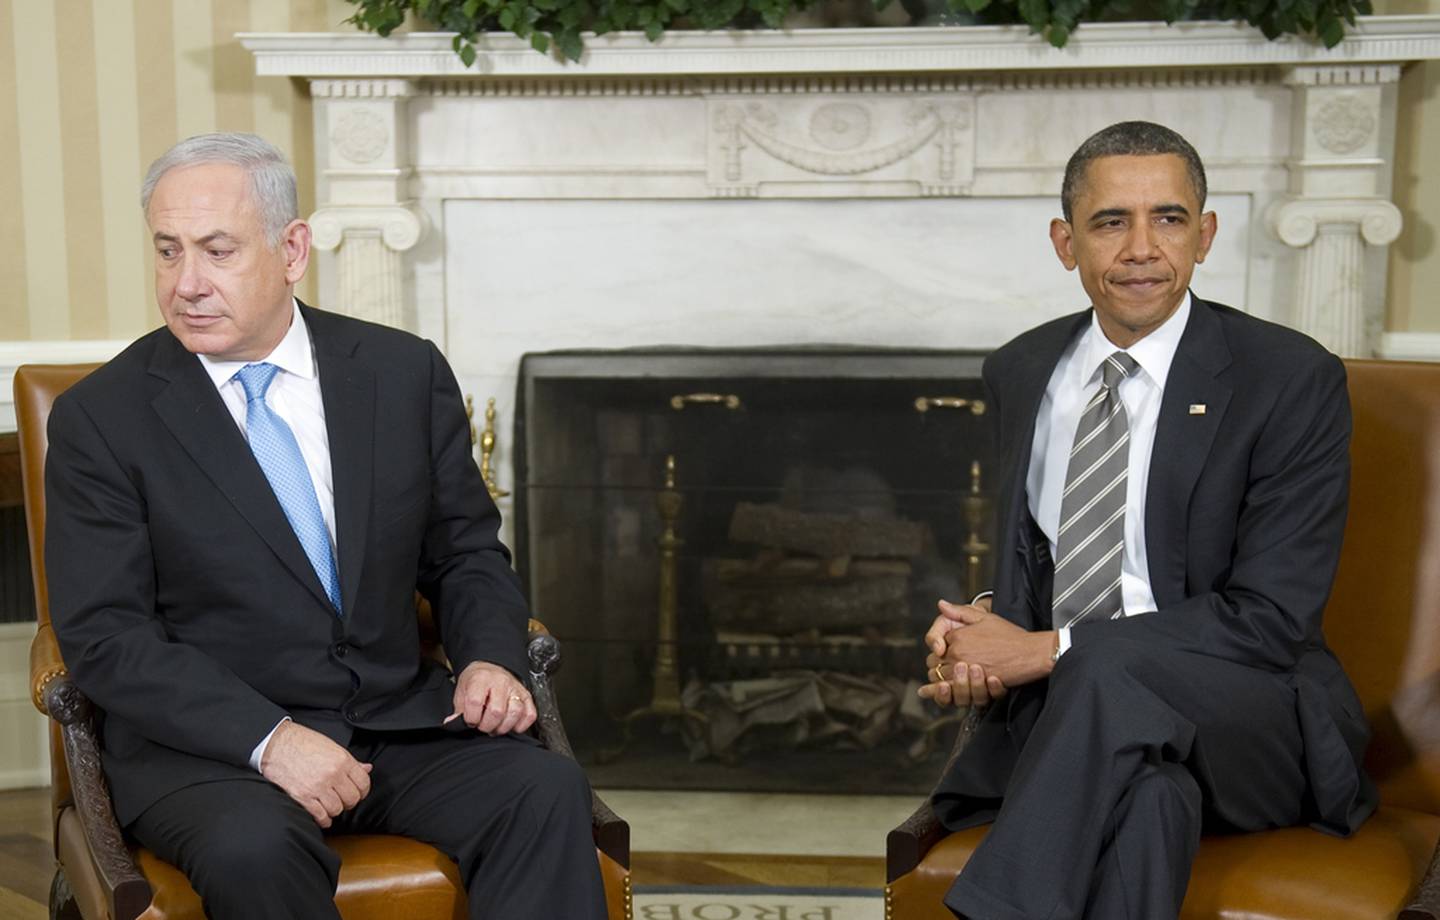 Relations between former Israeli prime minister Benjamin Netanyahu and former US president Barack Obama, pictured together in the Oval Office in 2011, were not particularly warm. AFP 